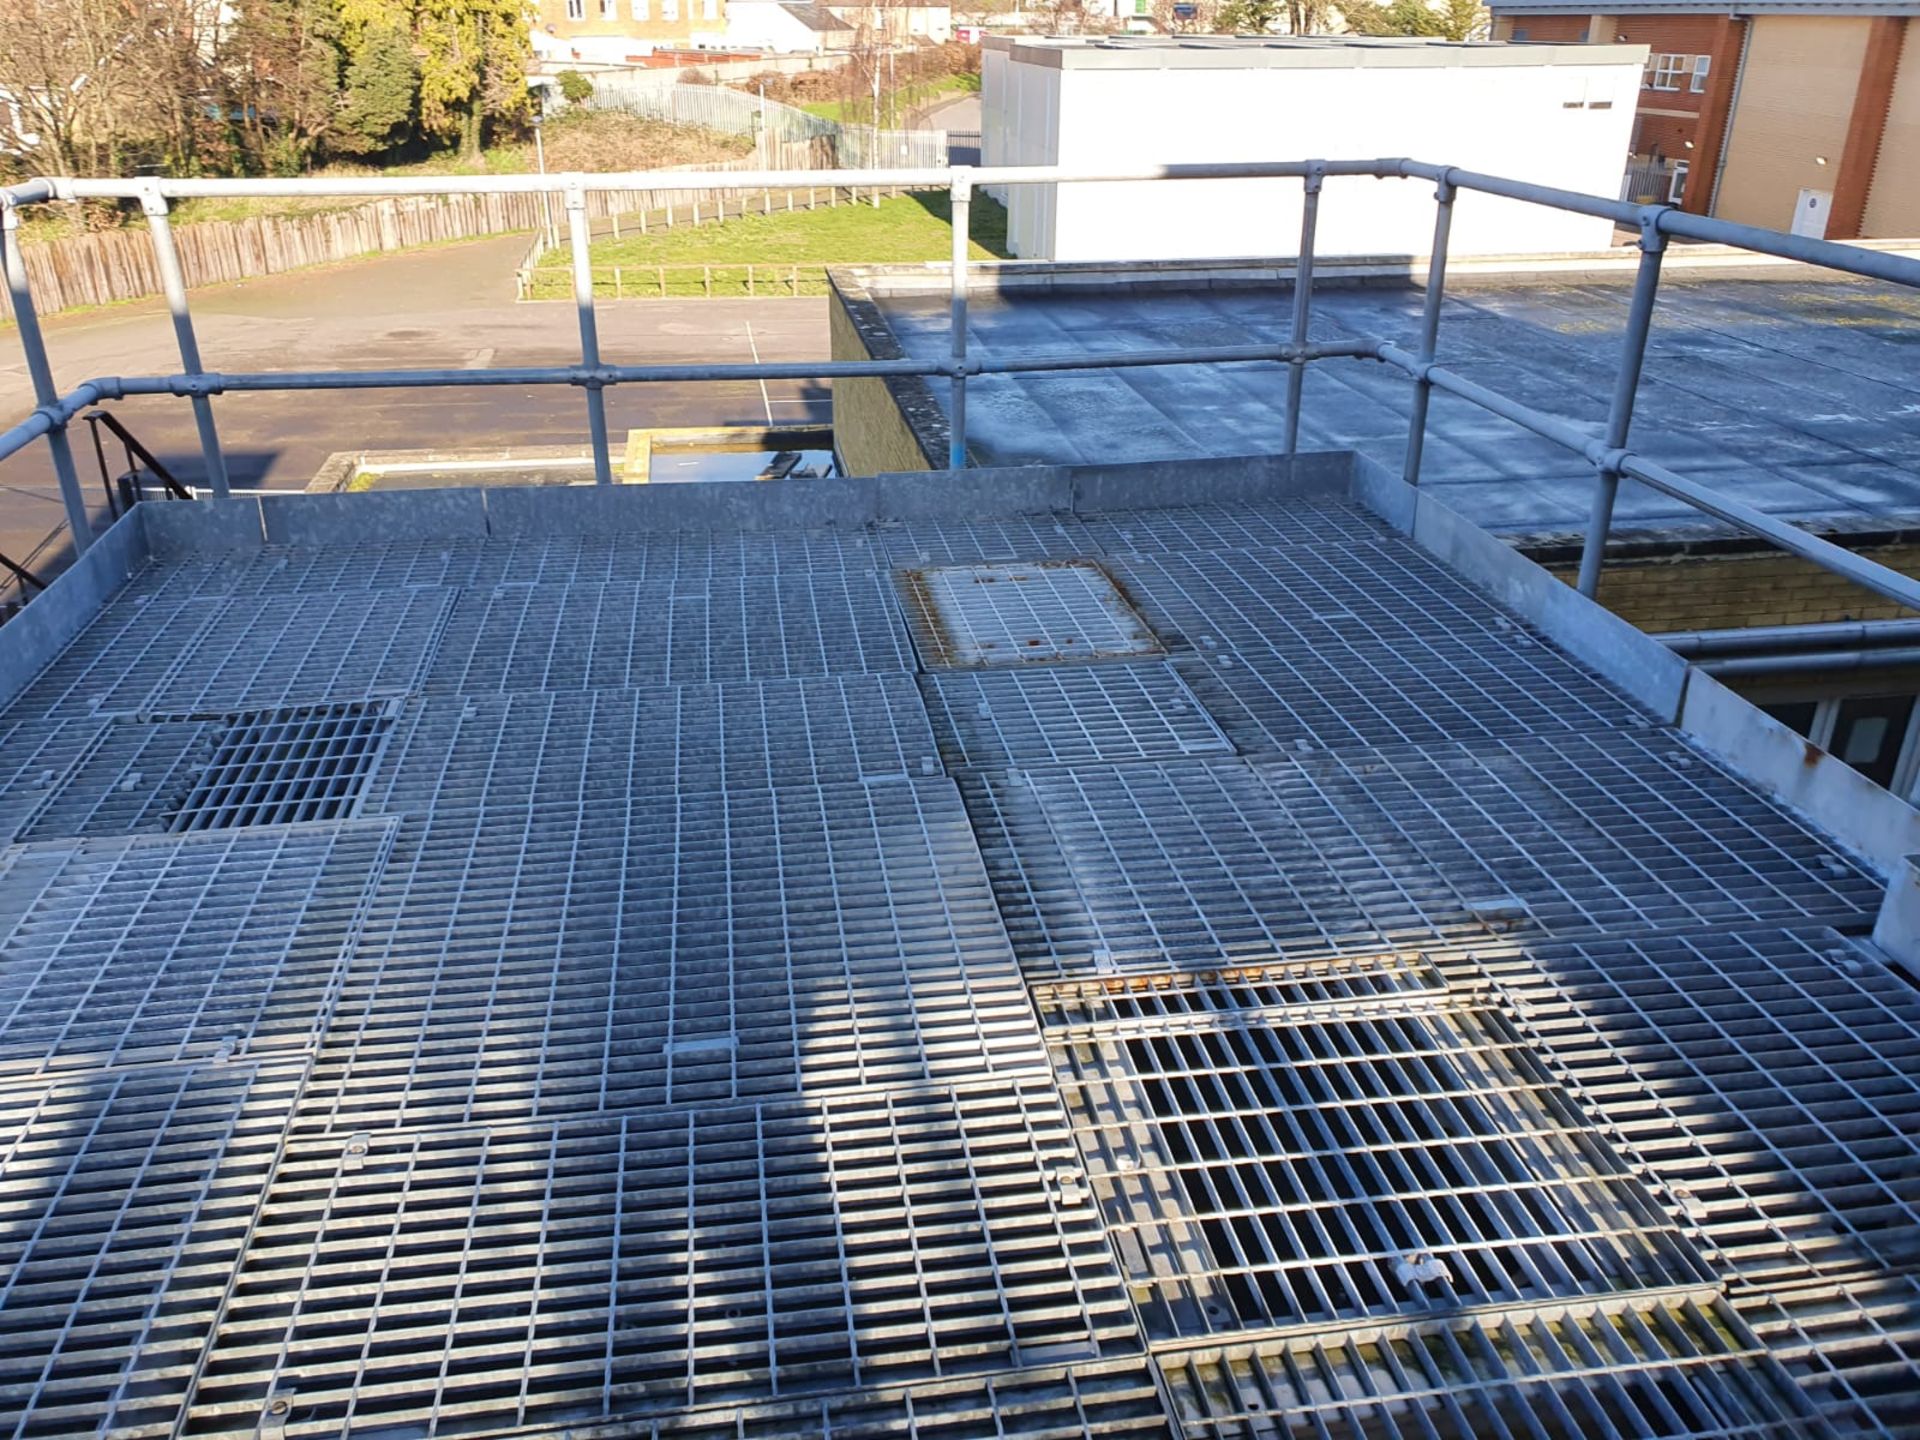 1 x Outdoor Rooftop Mezzanine Floor With Grid Anti Slip Floor Surface and Safety Hand Rails - - Image 2 of 10